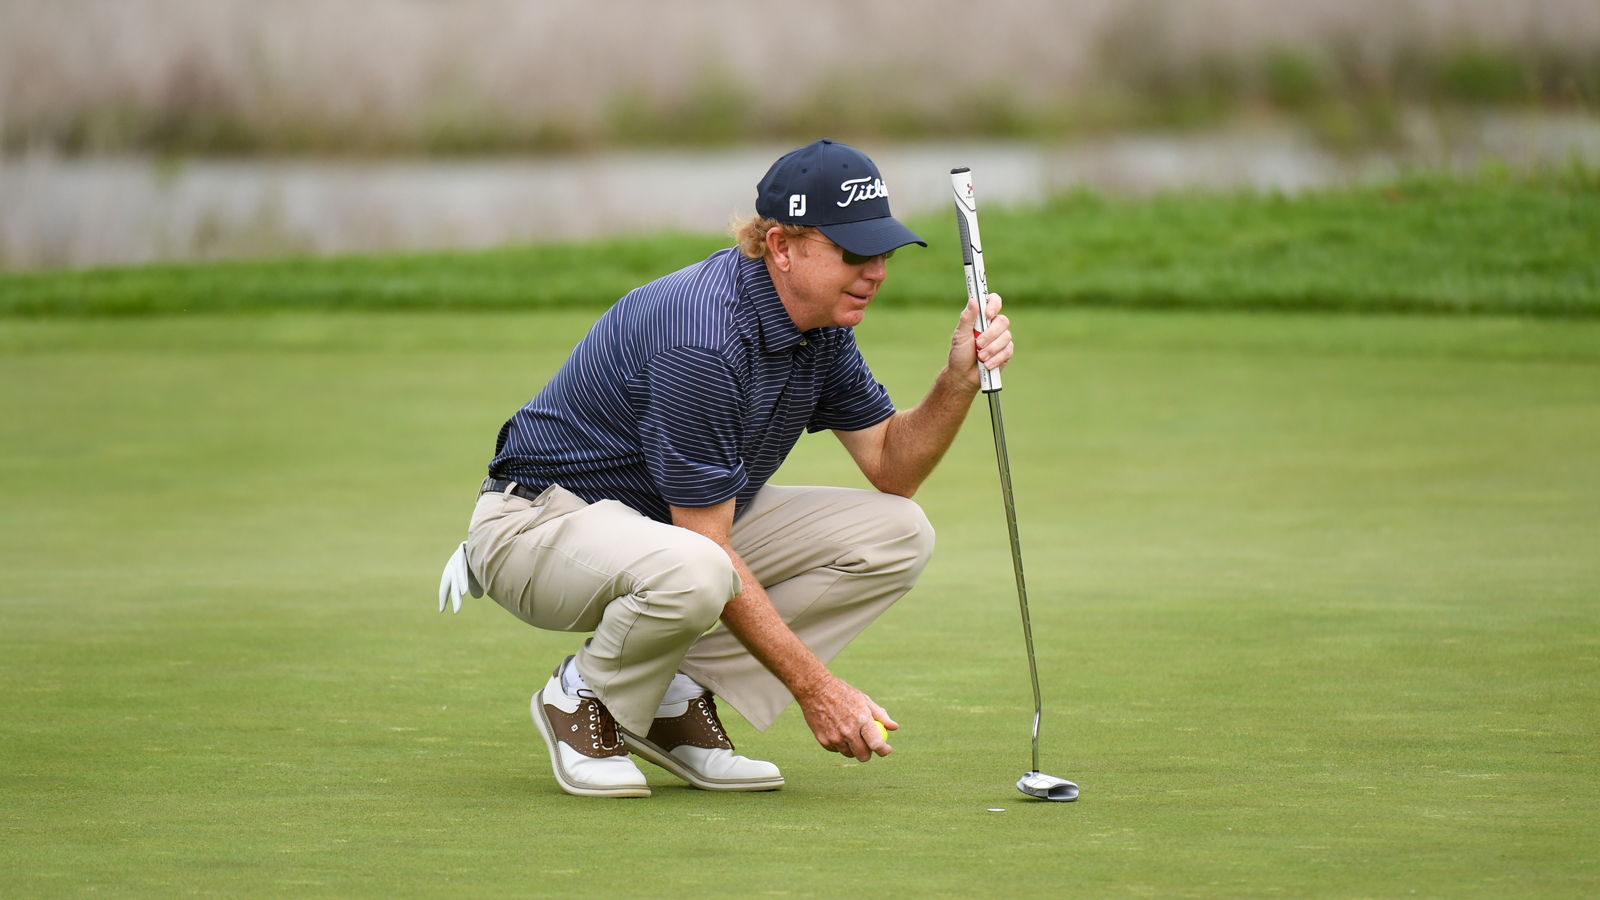 PGA Professional, Paul Claxton reads his putt on the 16th green during the first round of the 82nd KitchenAid Senior PGA Championship held at Harbor Shores Golf Club.